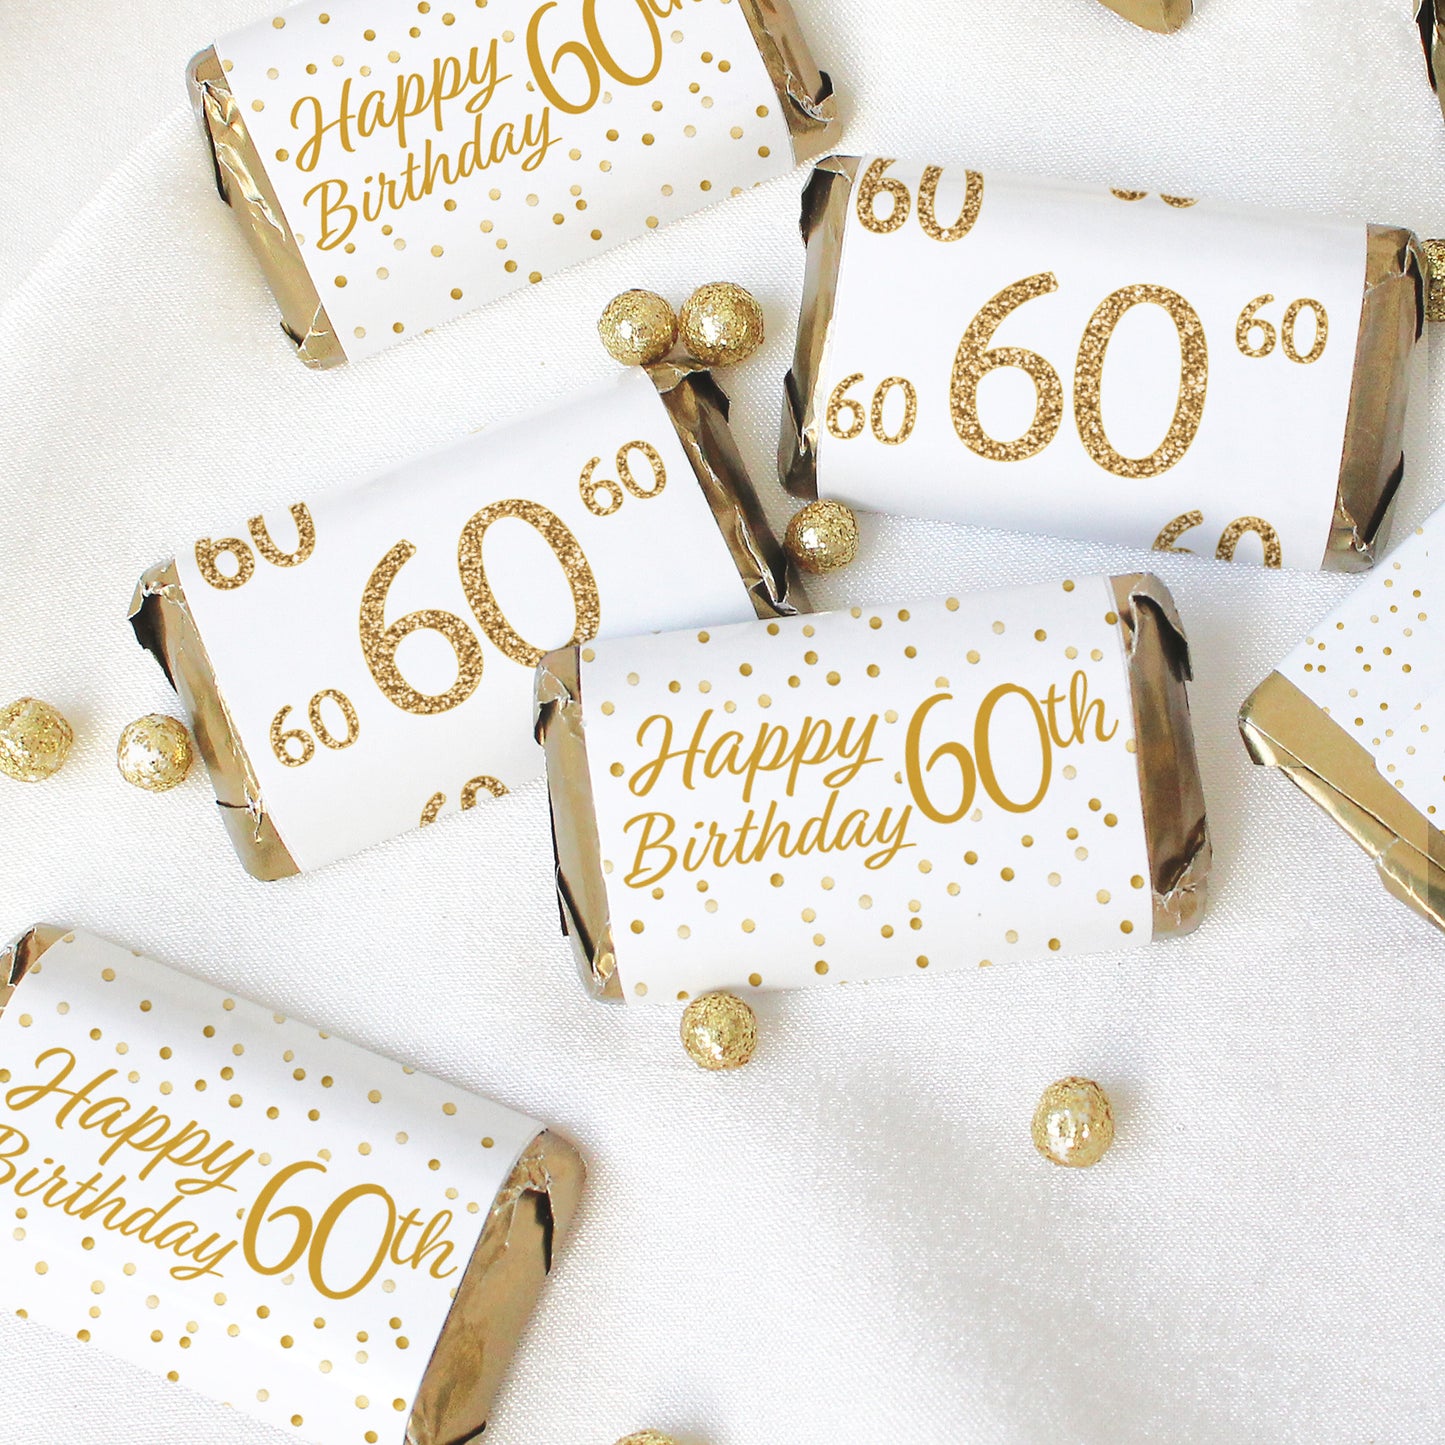 60th Birthday: White and Gold - Hershey's Miniatures Candy Bar Wrappers Stickers - 45 Stickers